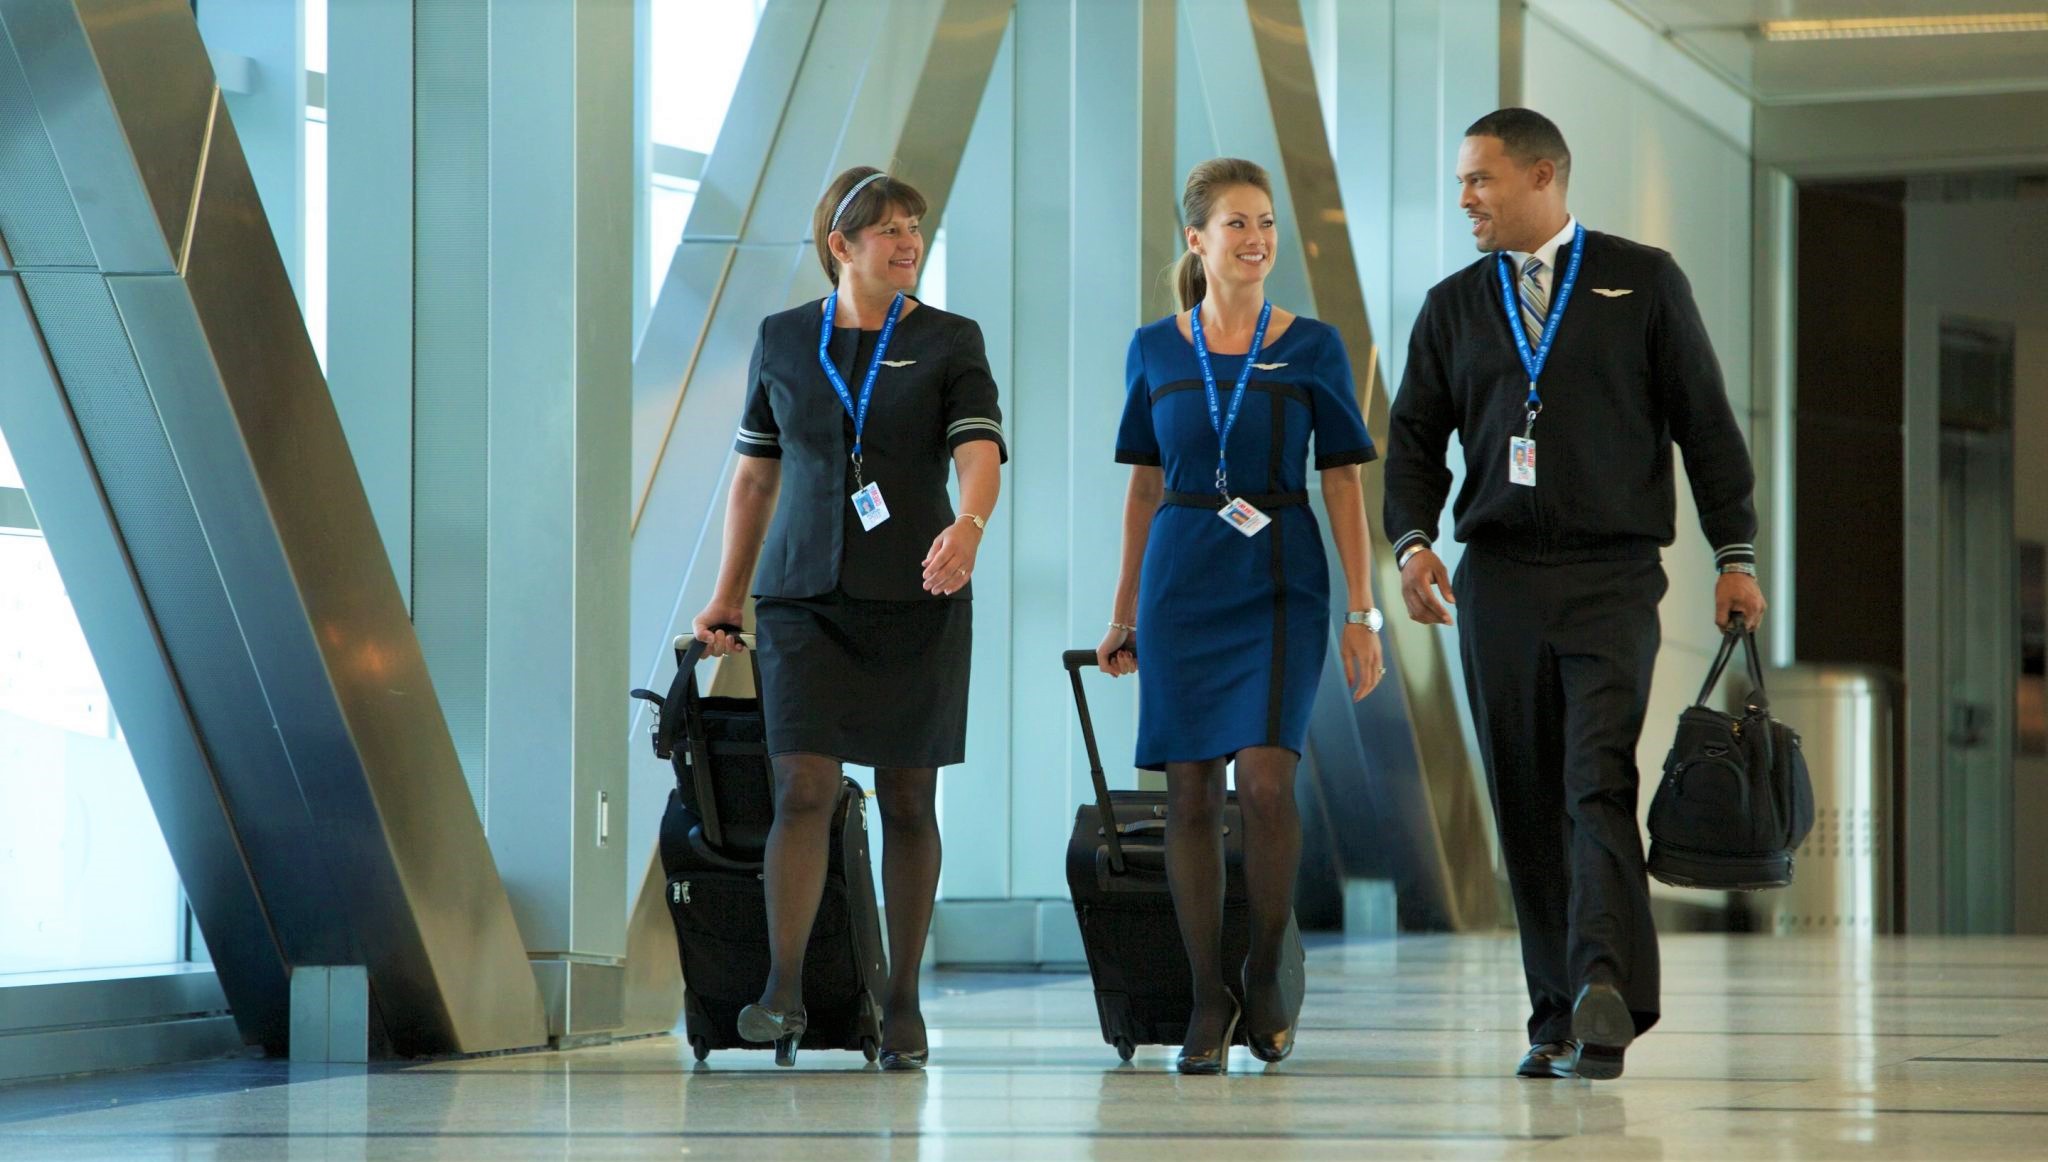 Extra  One  hour  Rest  period  will  be  awarded  to  the  airline  cabin  crew  members  under  Federal  Aviation  Administration  regulations  , taking  the  total  to  10  hours !